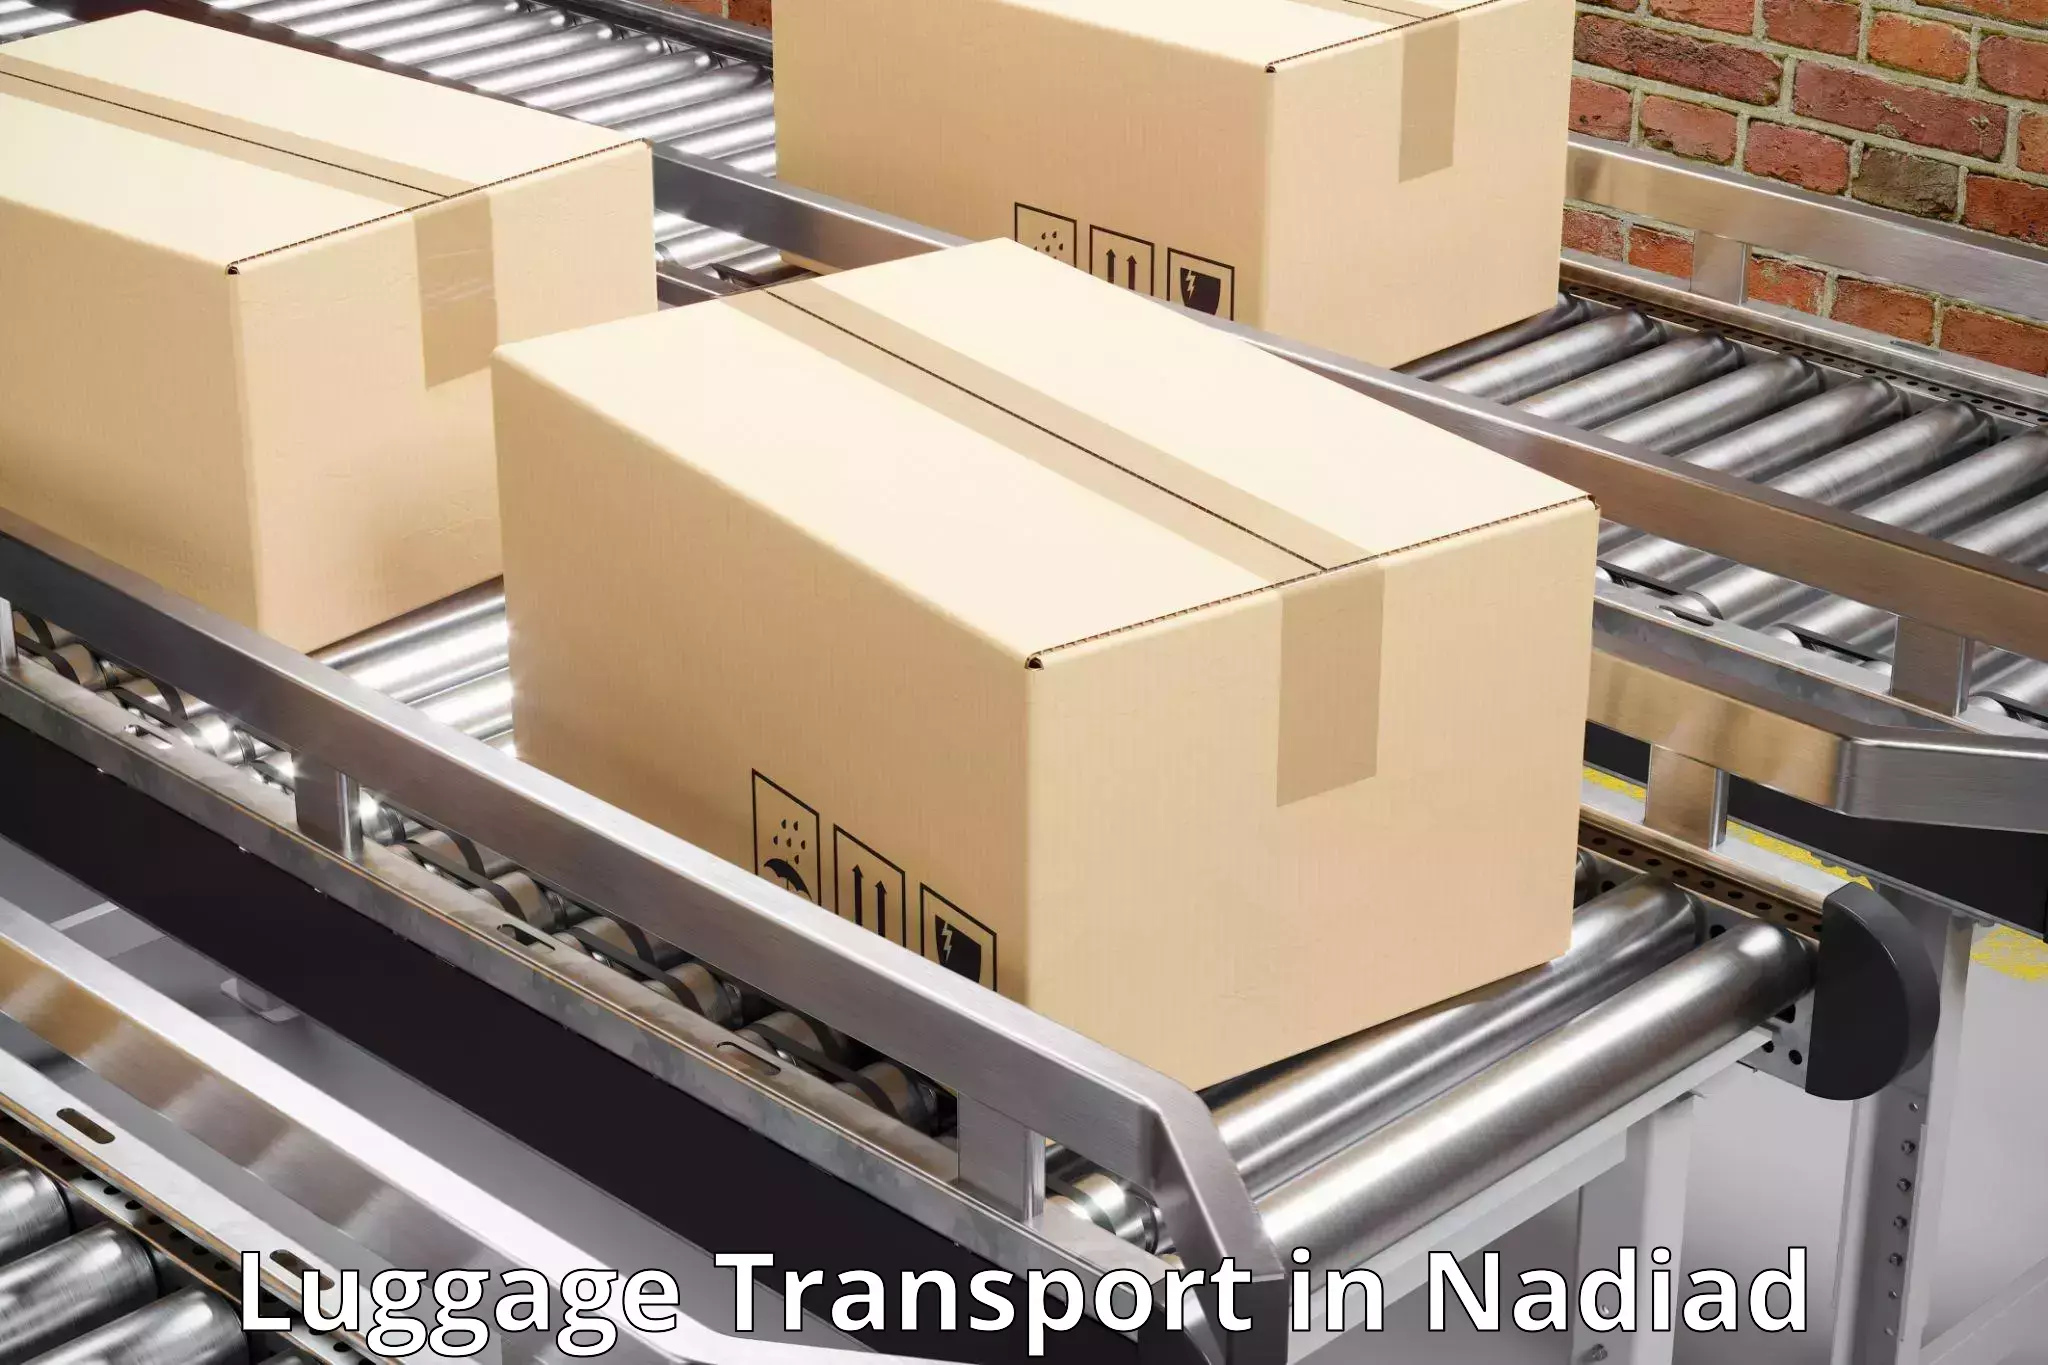 Luggage delivery logistics in Nadiad